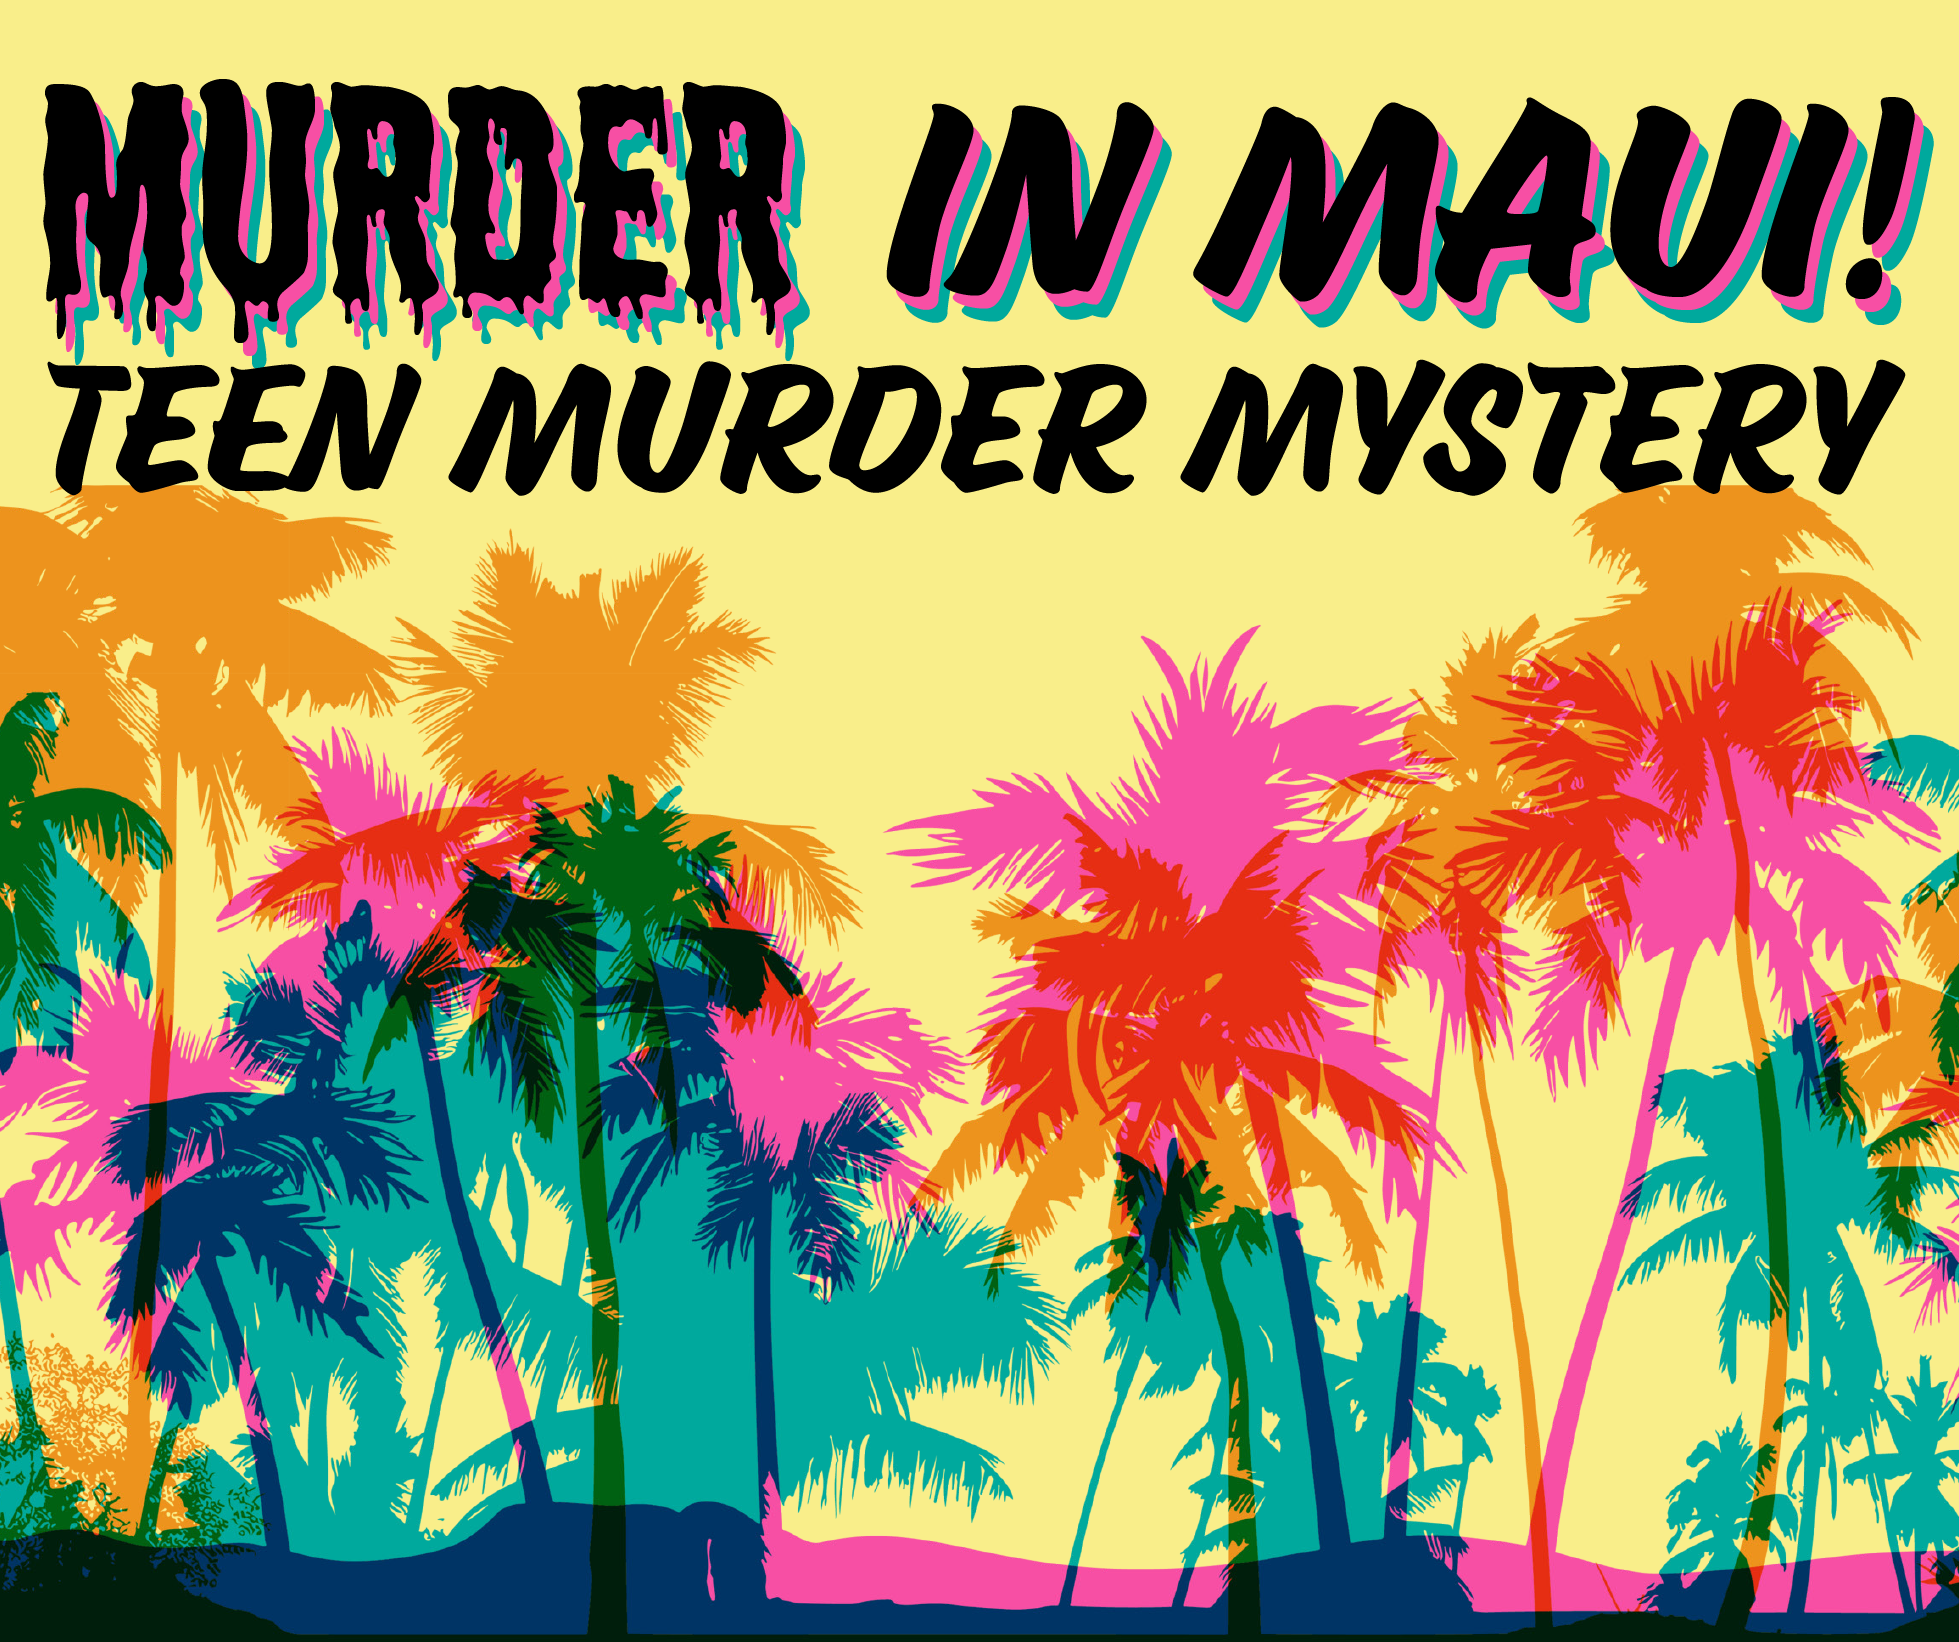 Text that reads "Murder in Maui! Teen Murder Mystery" on a yellow background with colorful palm trees.